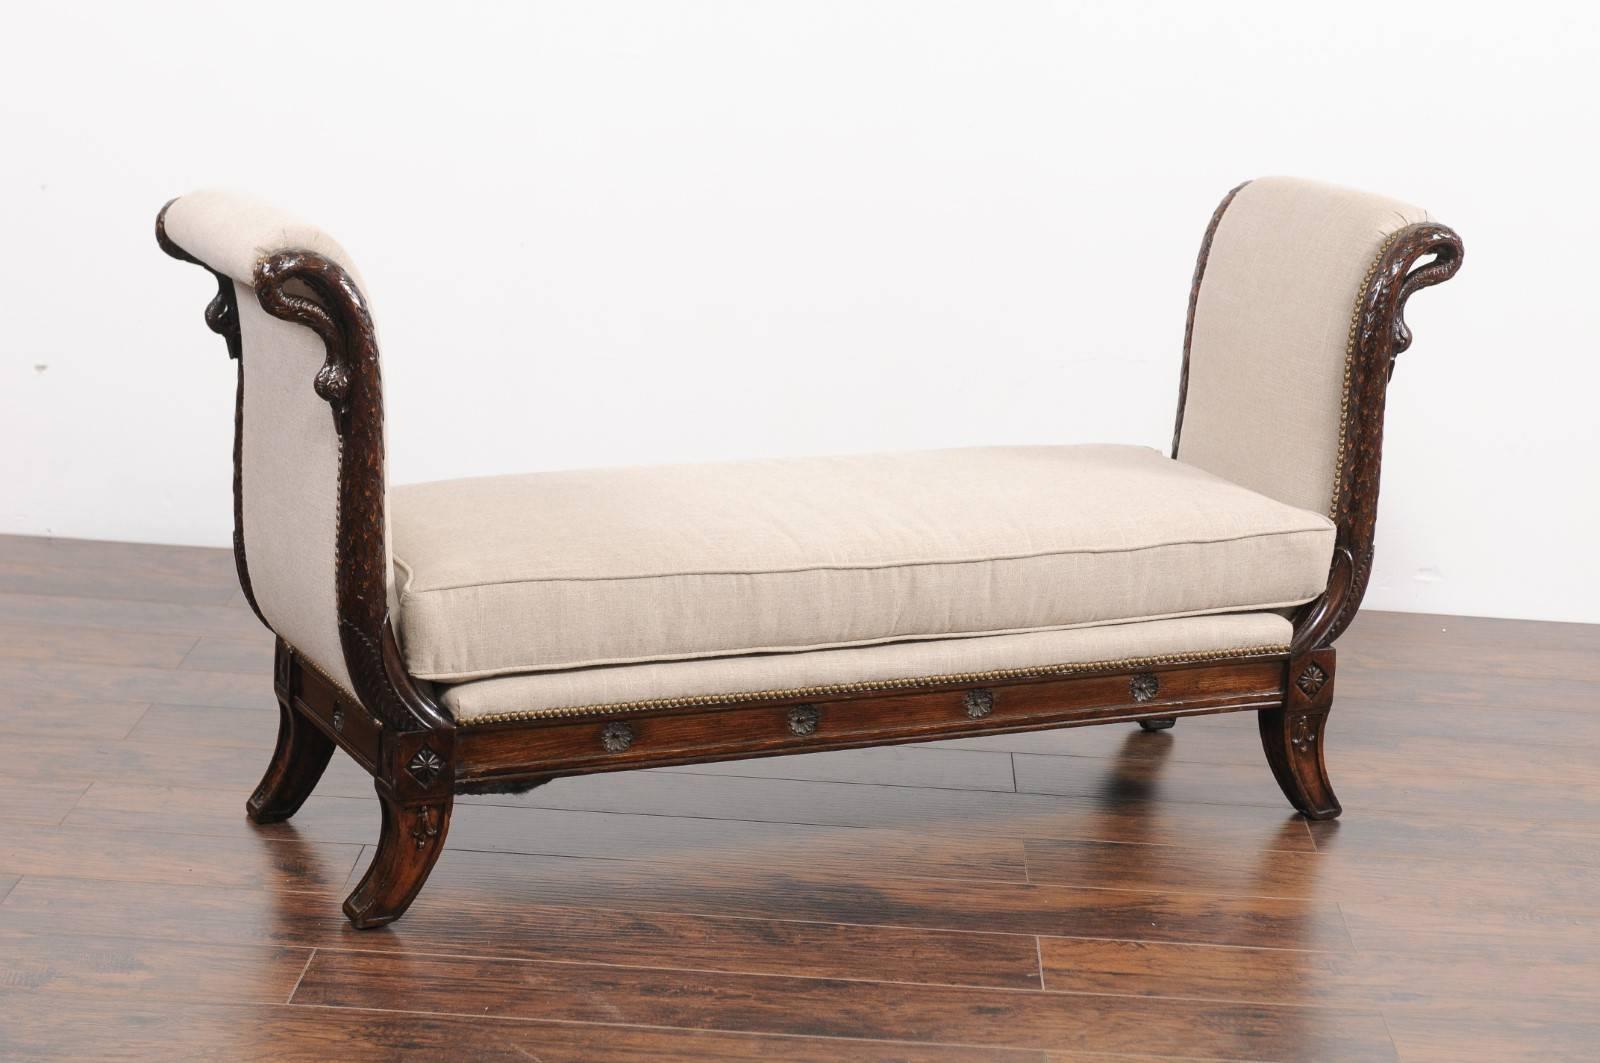 A French Empire style walnut bench from the mid-19th century, with carved swan heads and new upholstery. This French walnut backless bench features an exquisite silhouette, flanked without-scrolled sides adorned with delicate carved swan figures.